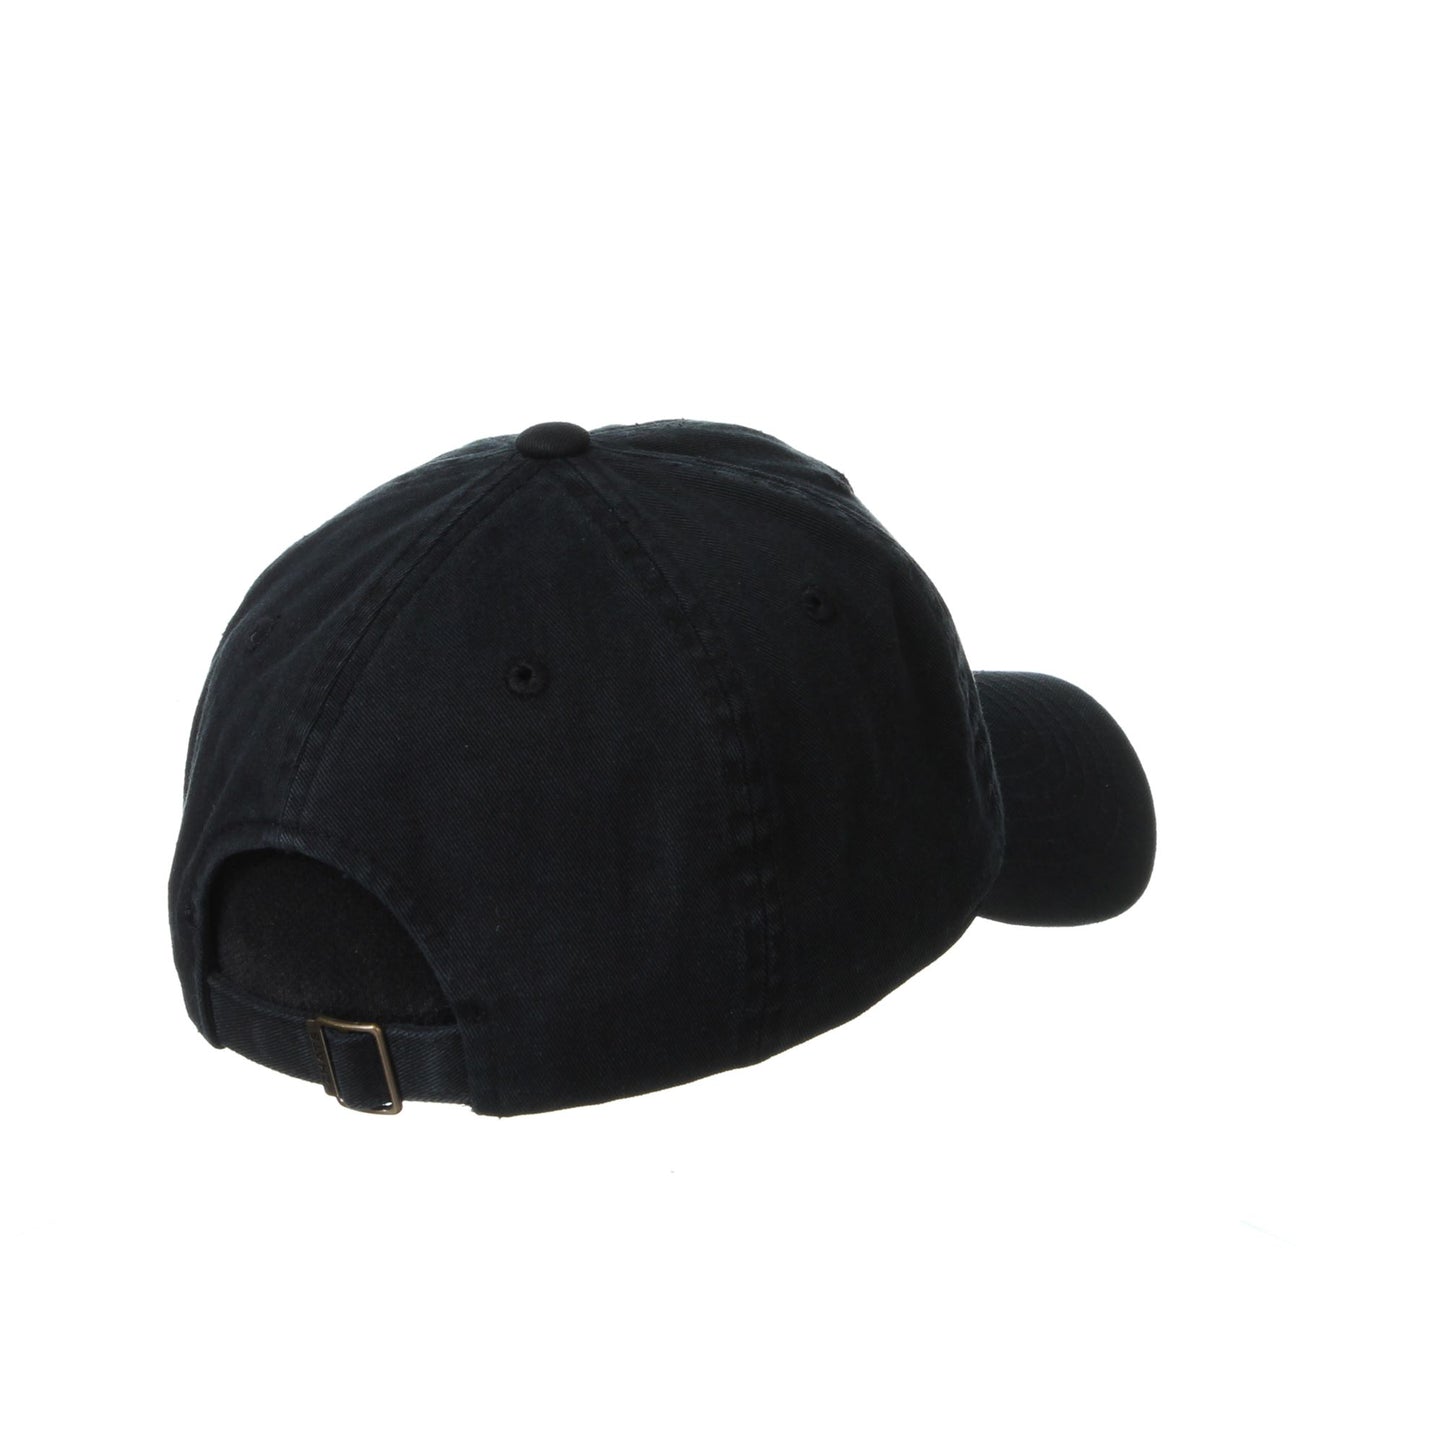 Triumph Scholarship Relaxed Fit Adjustable Hat - Black